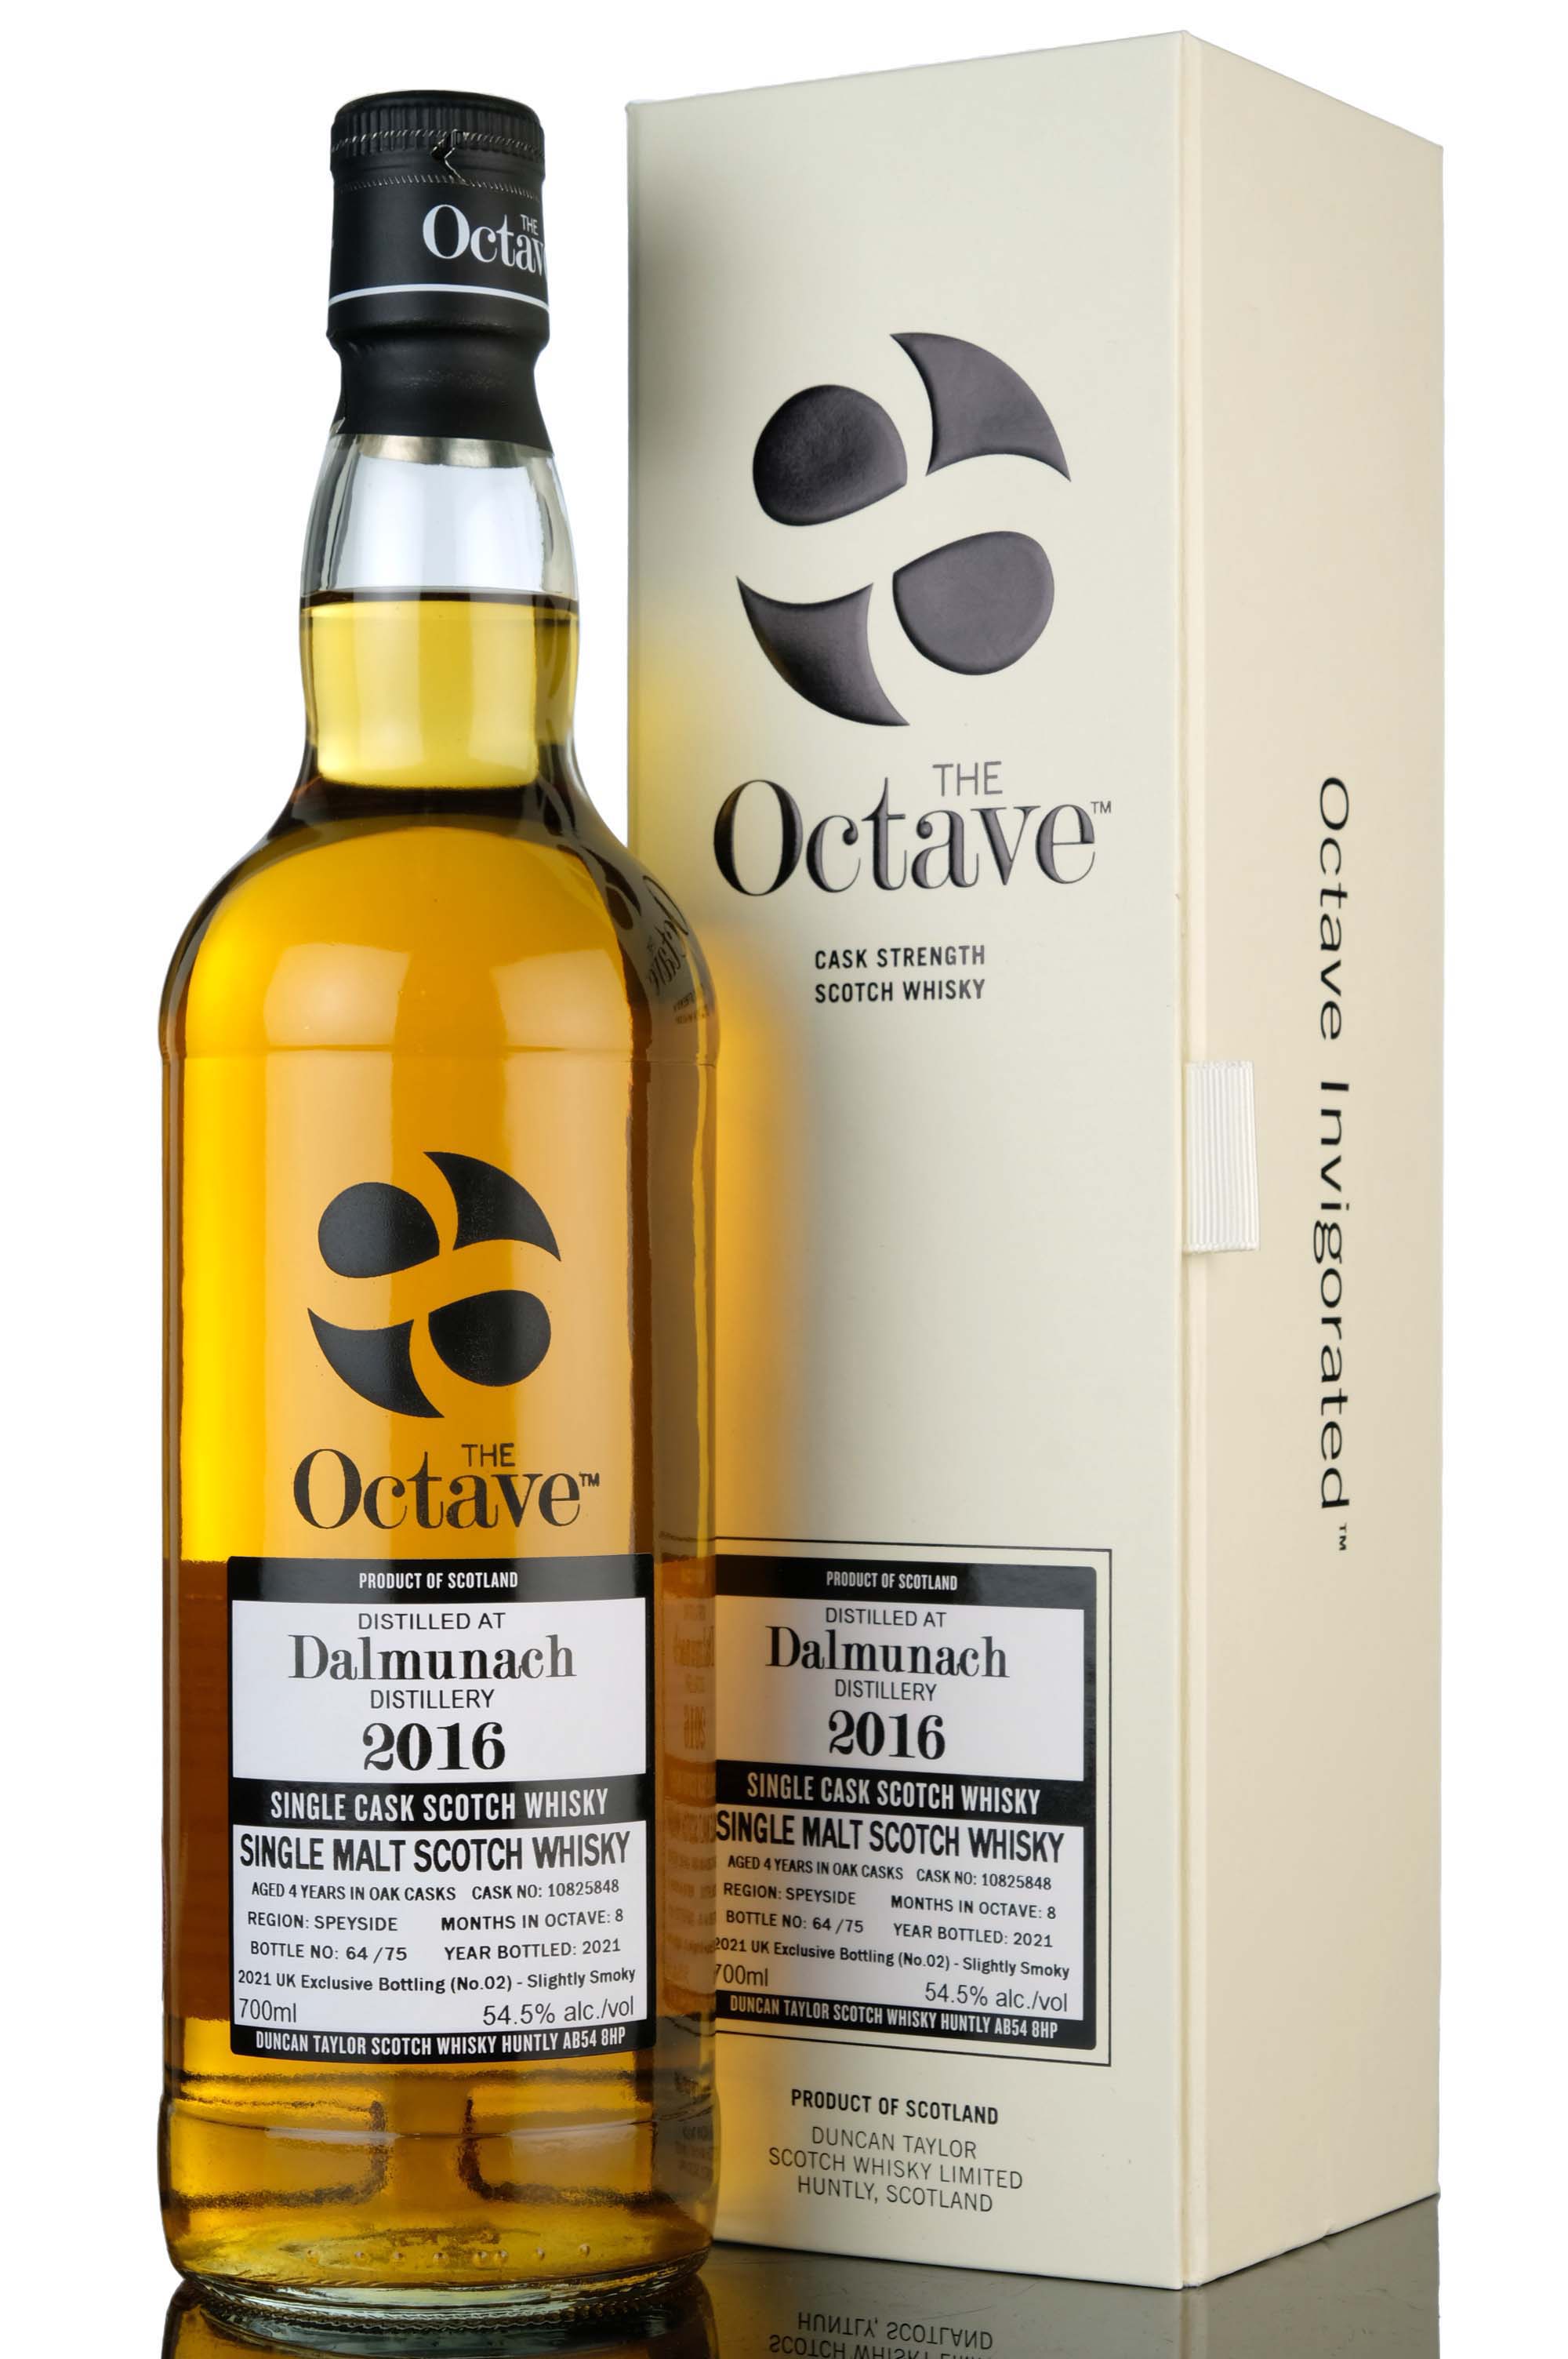 Dalmunach 2016-2021 - 4 Year Old - Duncan Taylor Octave - Single Cask 10825848 - UK Exclus